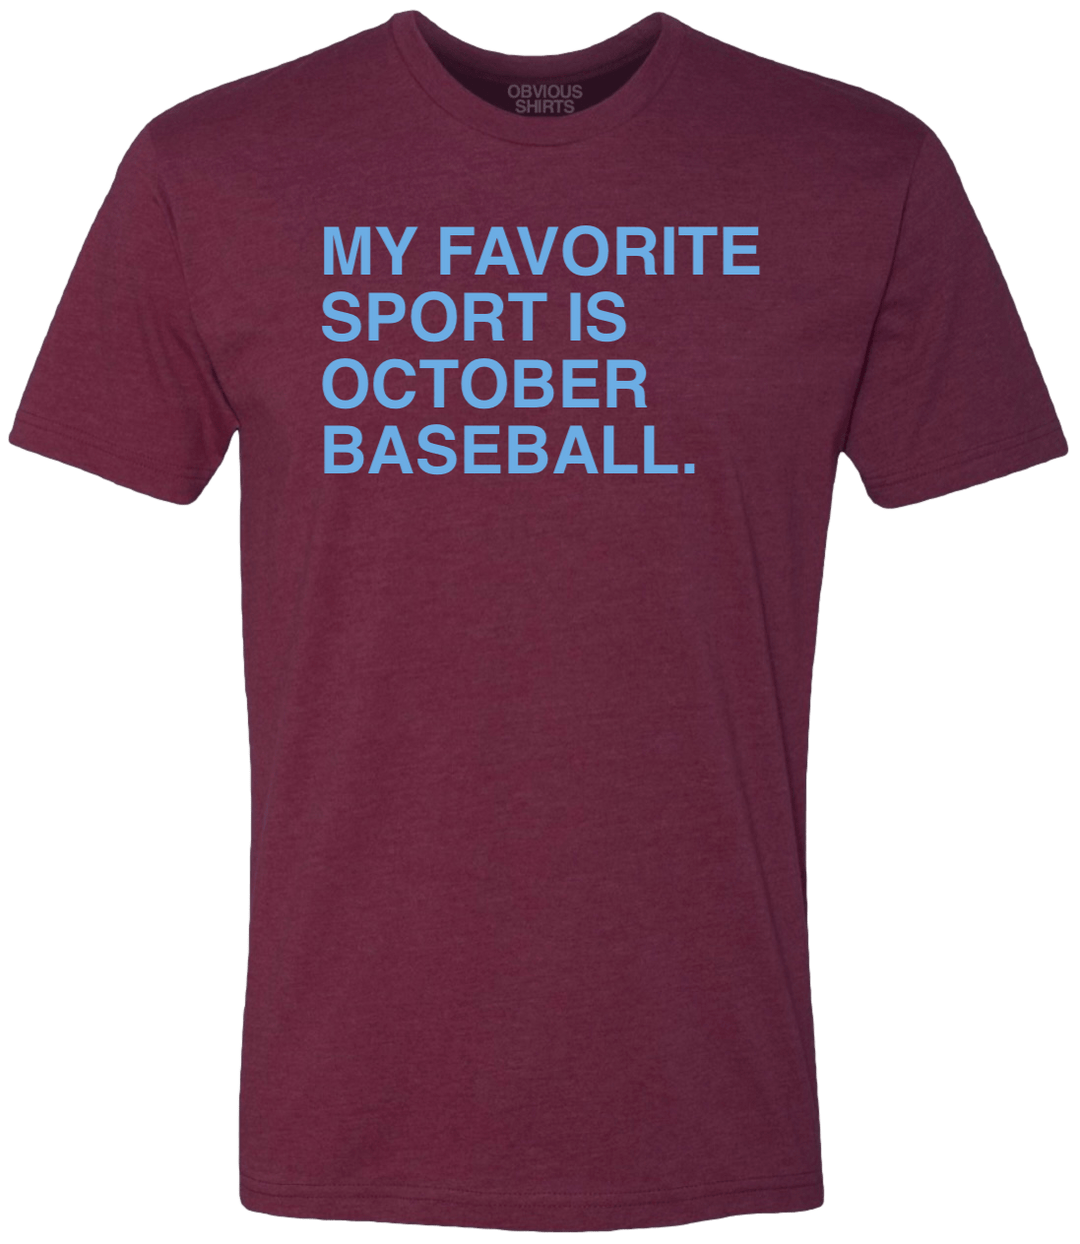 MY FAVORITE SPORT IS OCTOBER BASEBALL. - OBVIOUS SHIRTS